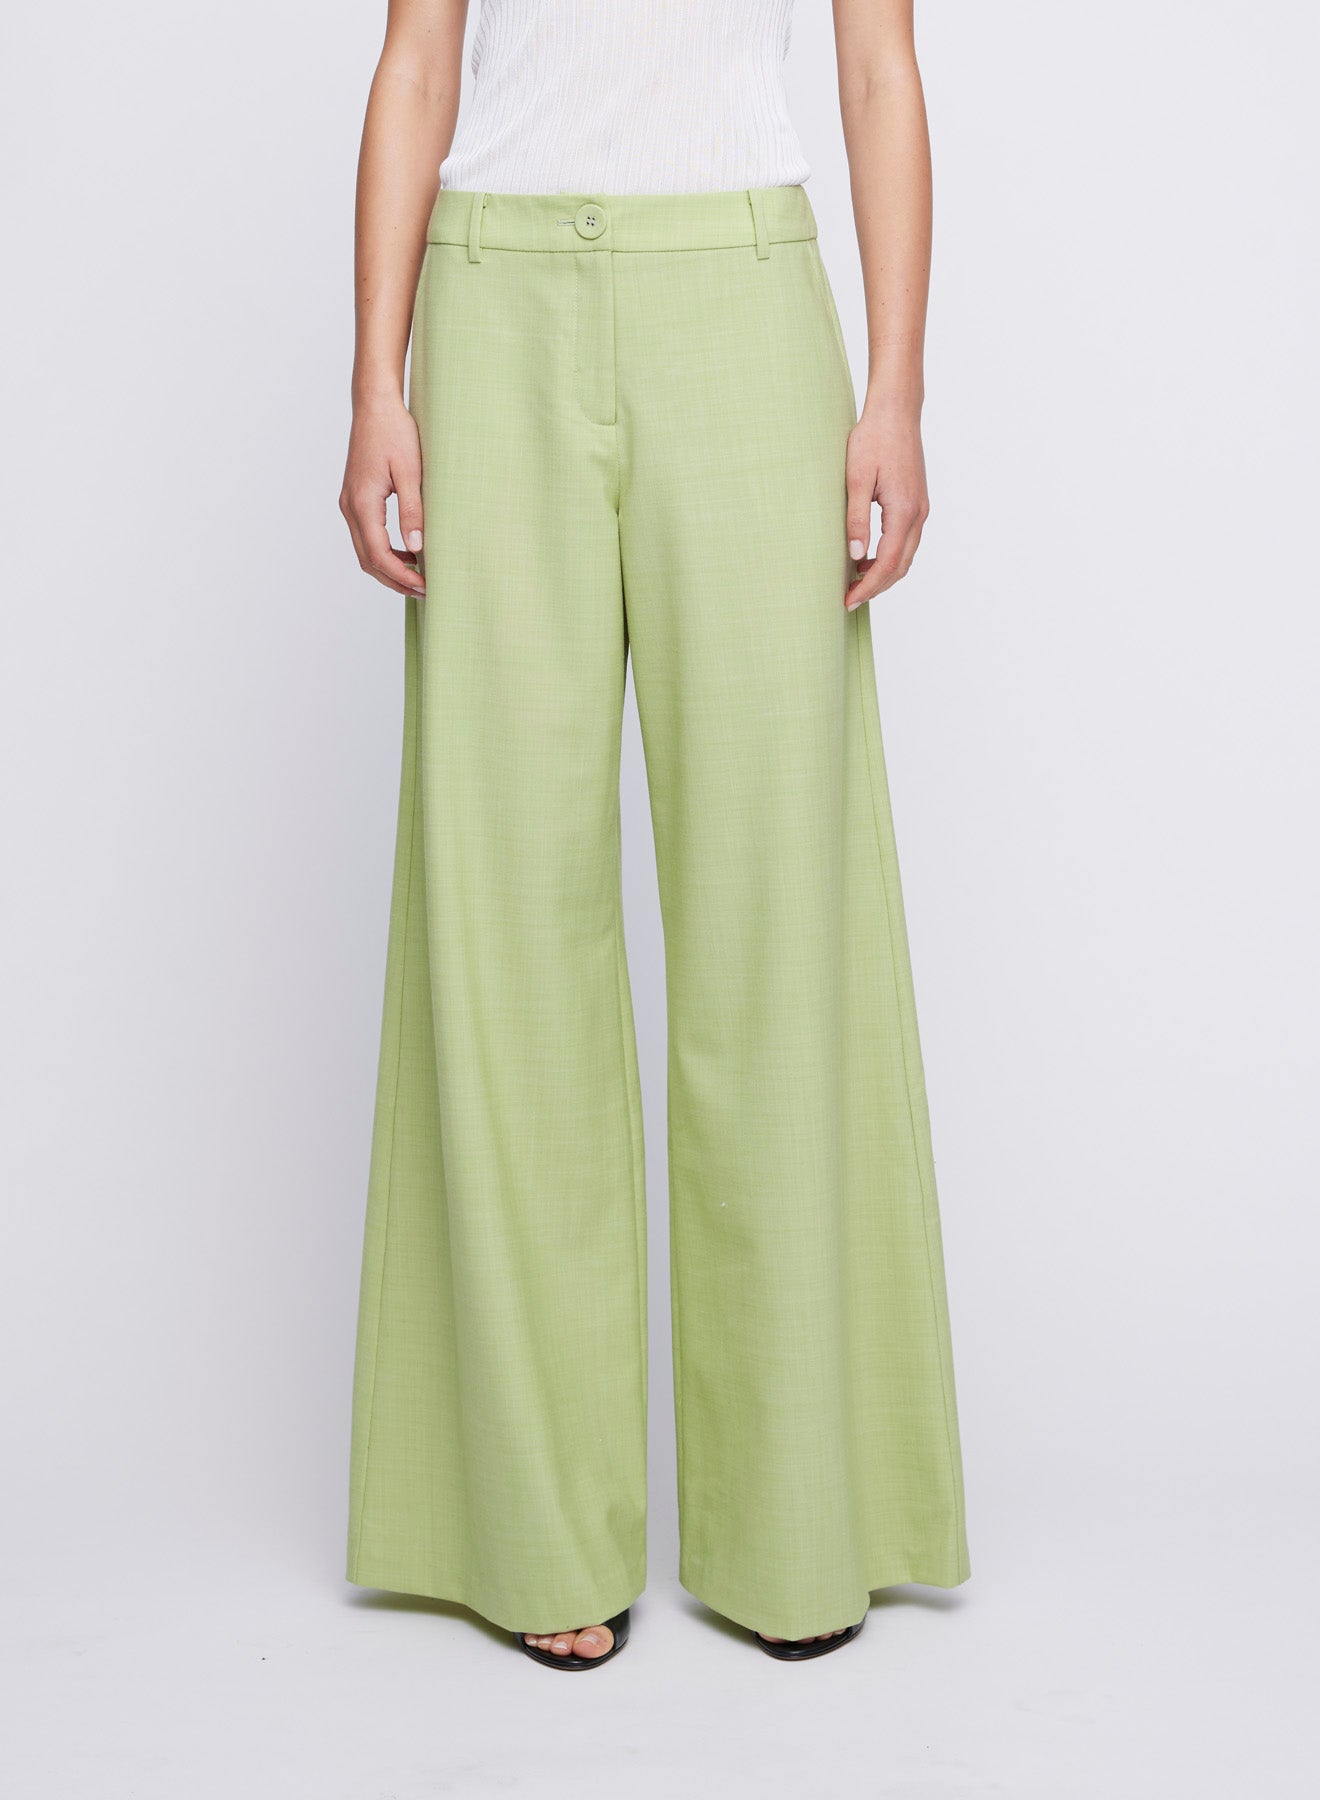 ANNA QUAN's wardrobe staple Wide Leg Tailored Pants, feature a classic button, zip fastening and belt loops. Designed to sit on the waist and the leg hem skimming the floor. Tailored pants, work pants, everyday pants, colourful work pants, tailored wool pants.